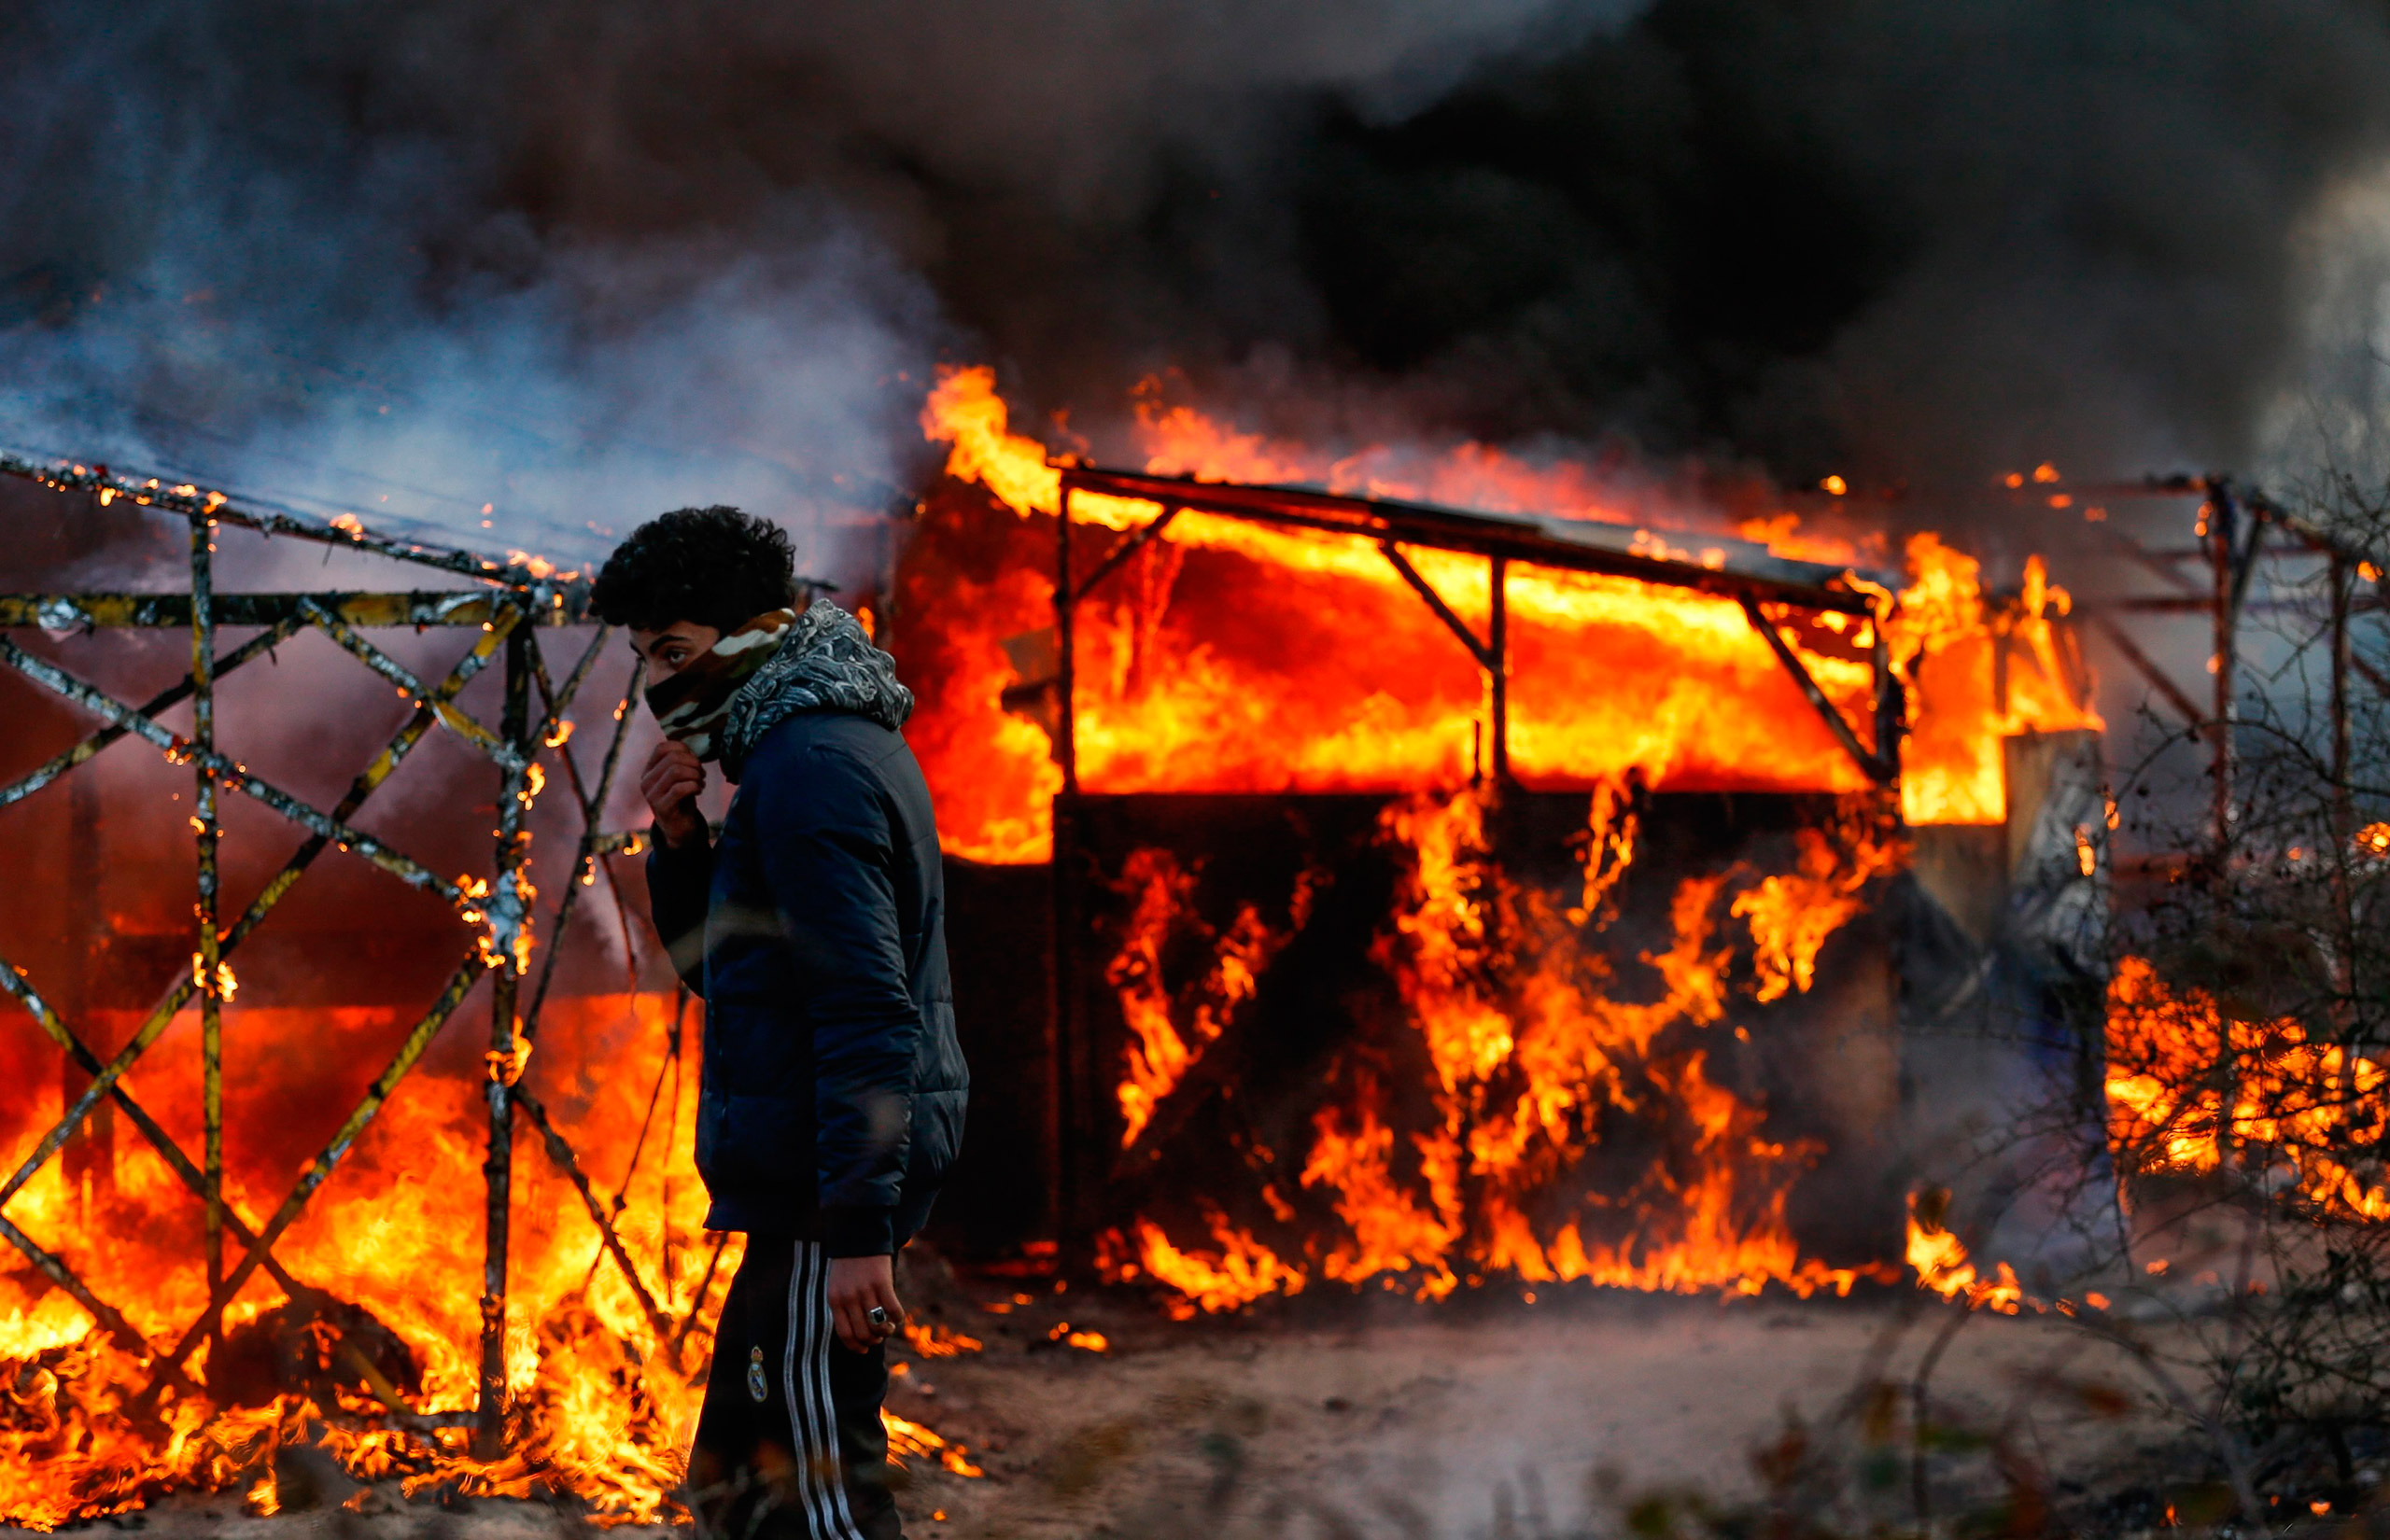 A refugee watches a shelter burn during the start of the expulsion of a part of the  Jungle  migrant camp in Calais, France, Feb. 29, 2016.